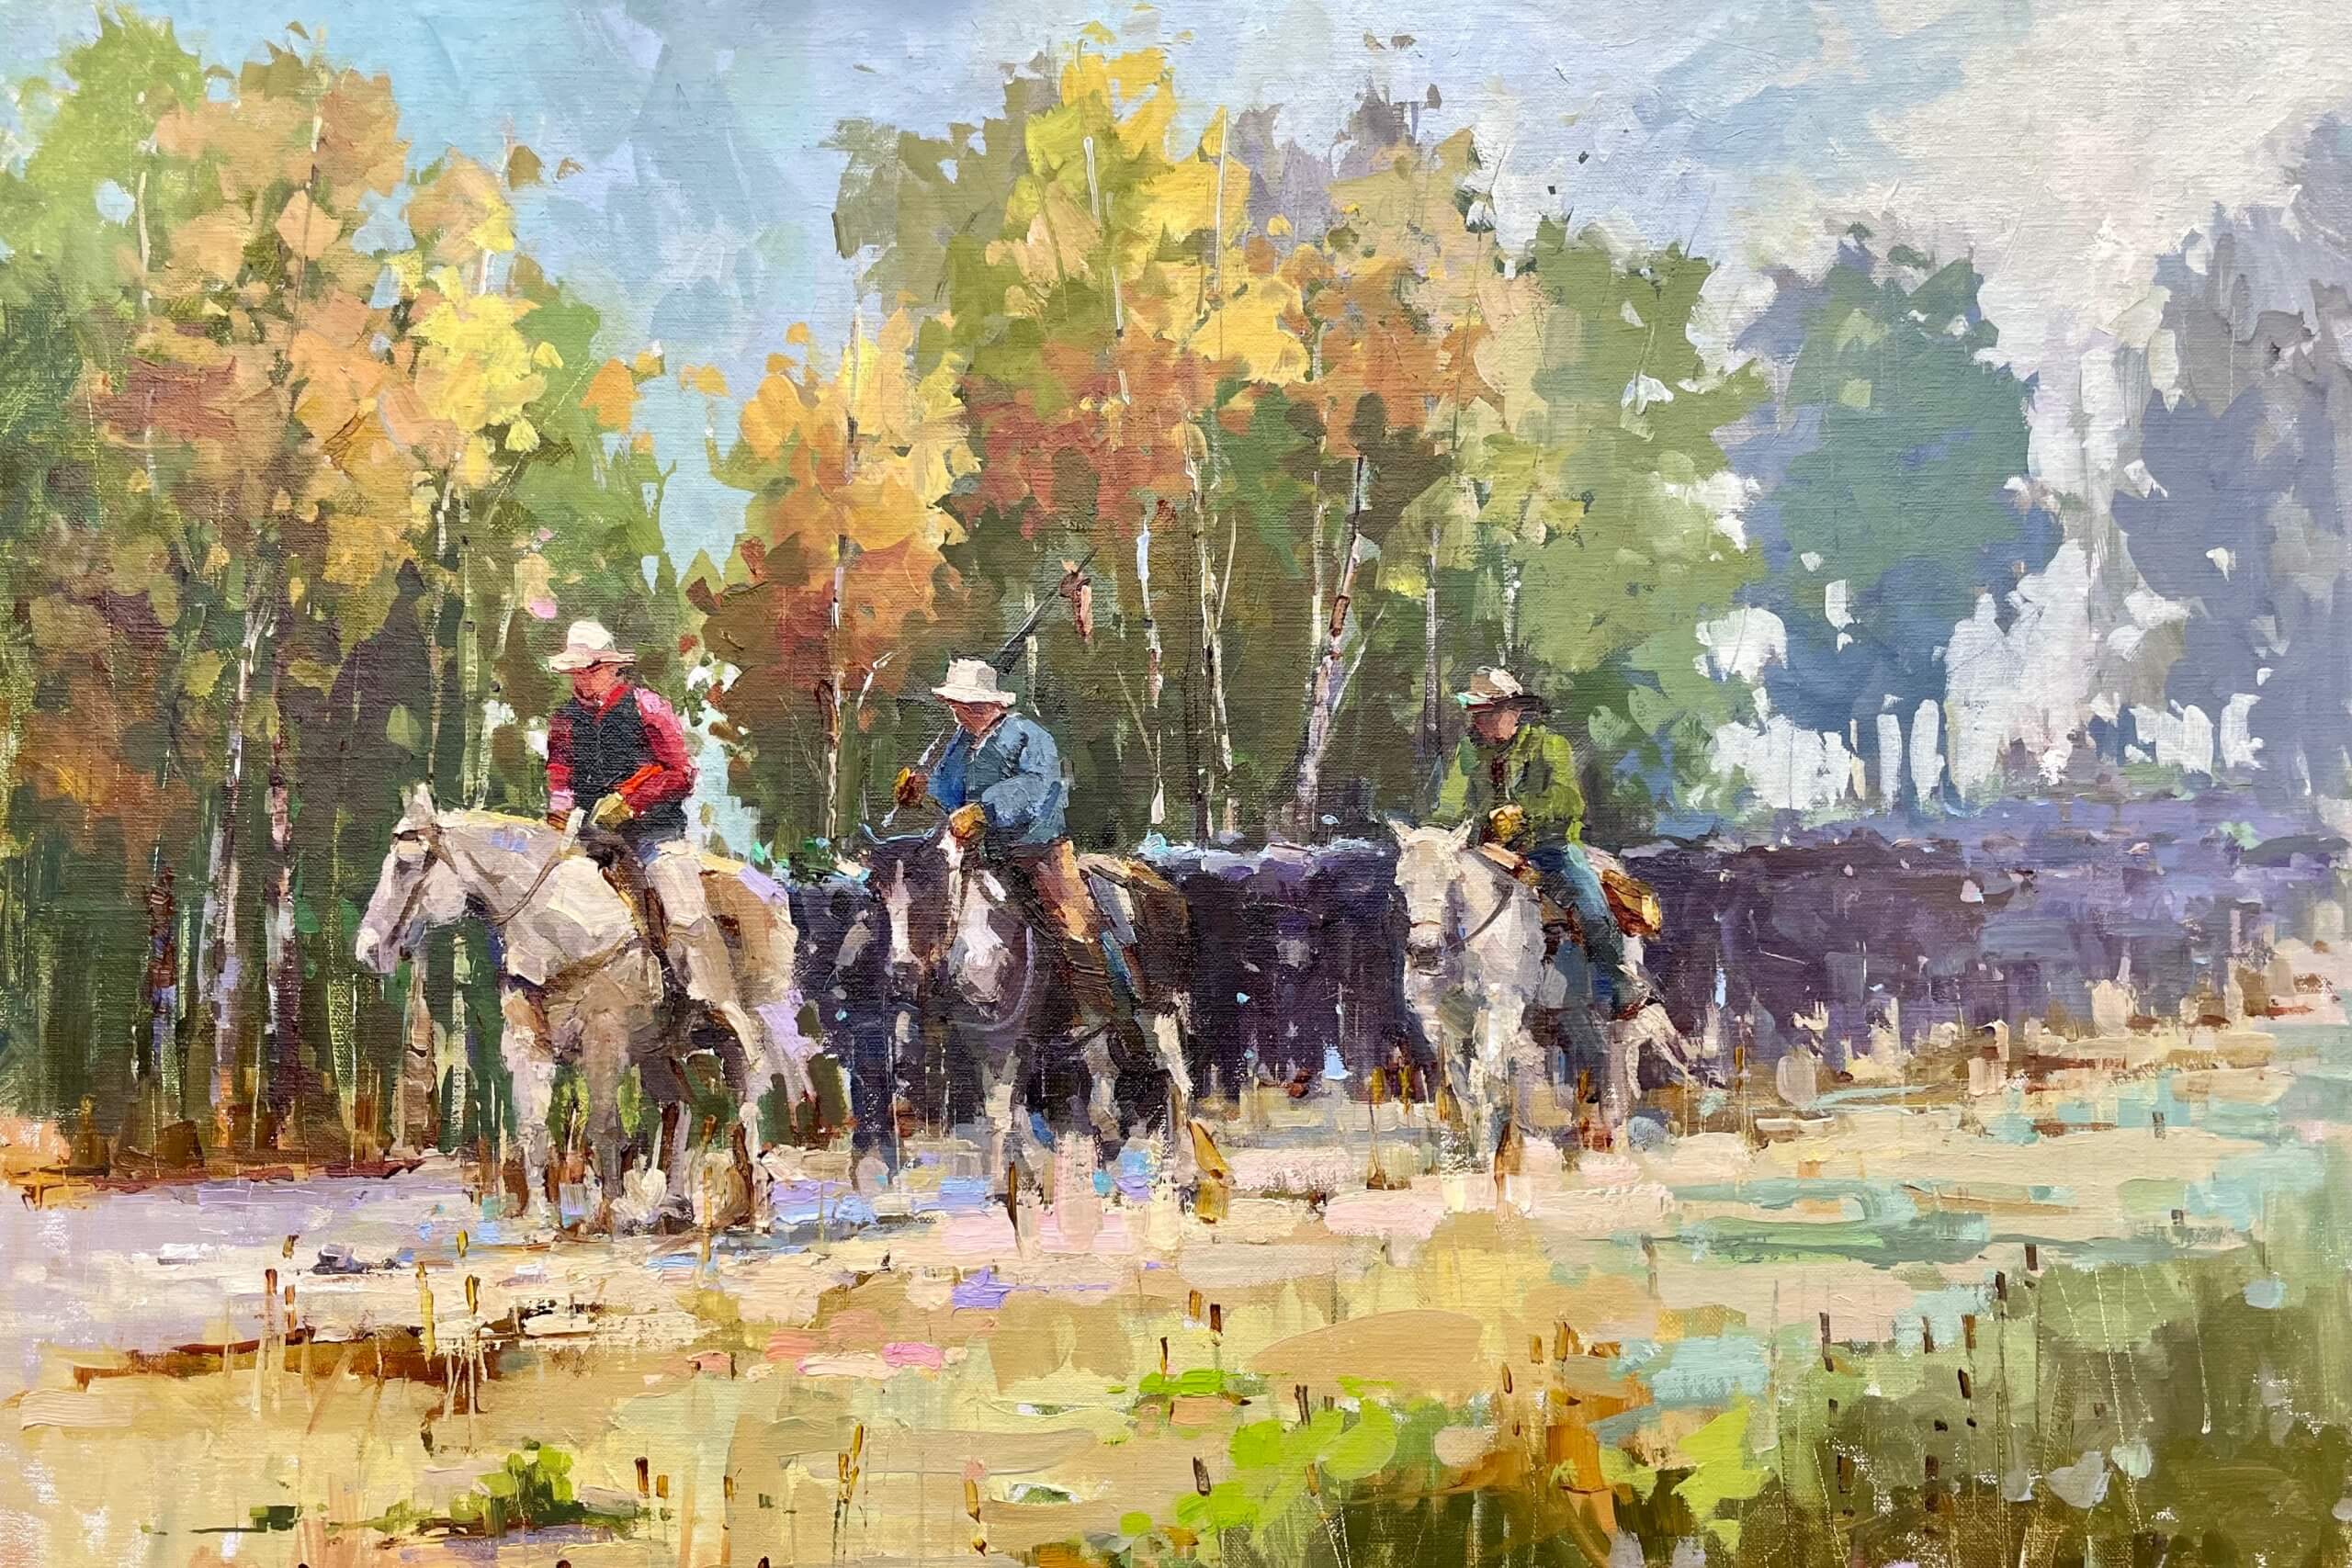 Moving the Herd painting of Cowboys moving a herd of cattle across a fall landscape.